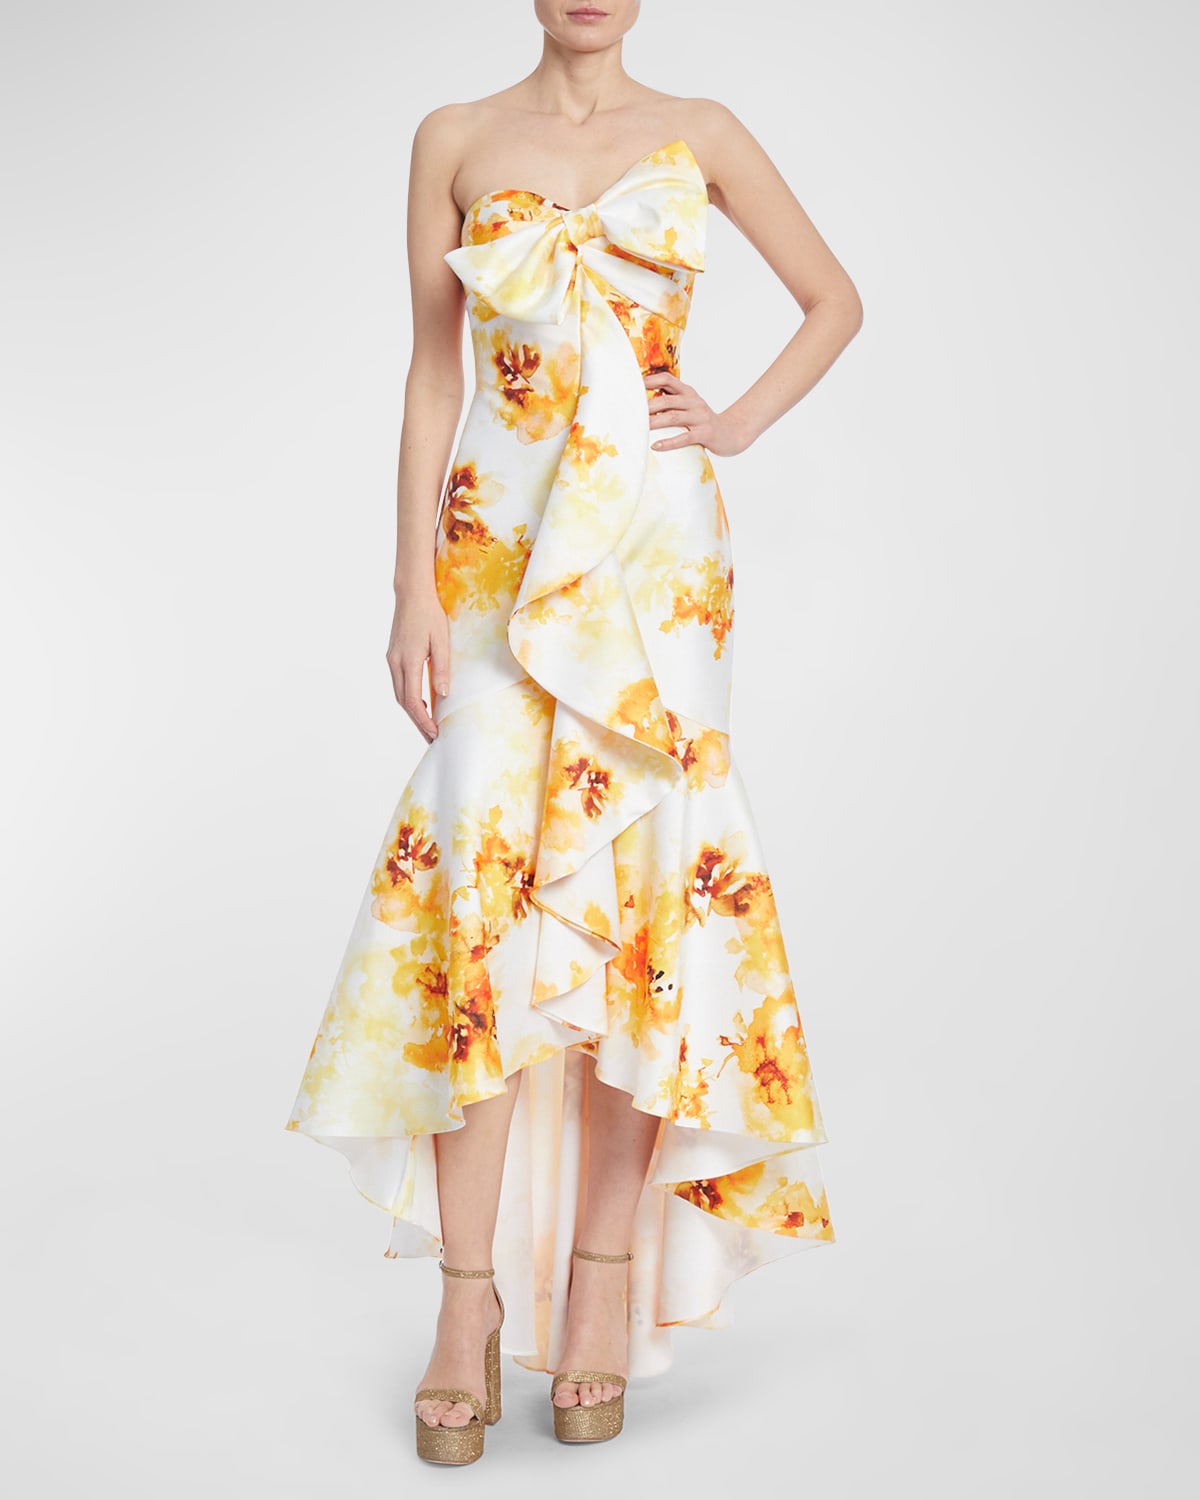 BADGLEY MISCHKA STRAPLESS FLORAL-PRINT HIGH-LOW BOW GOWN